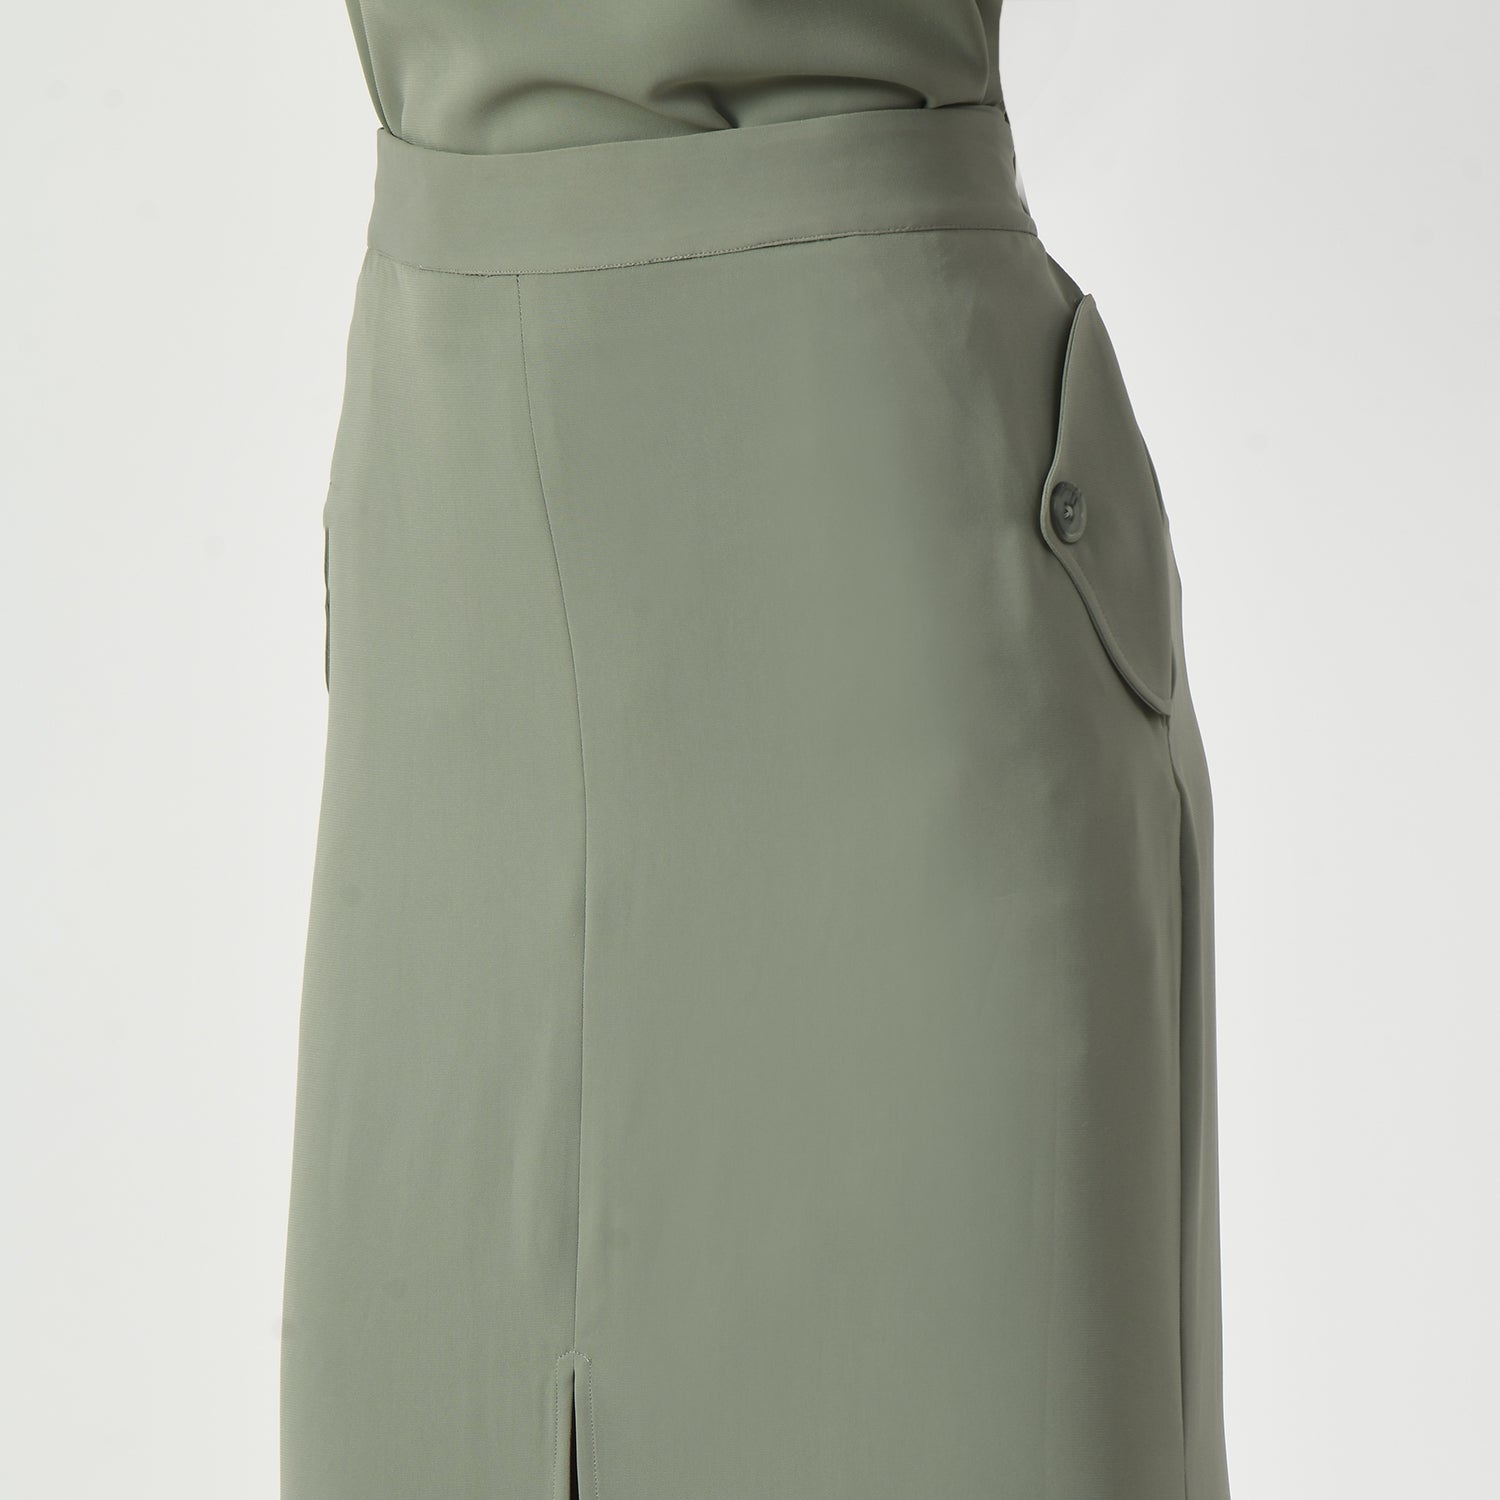 Dusty Green Fish Cut Skirt With Front Slit